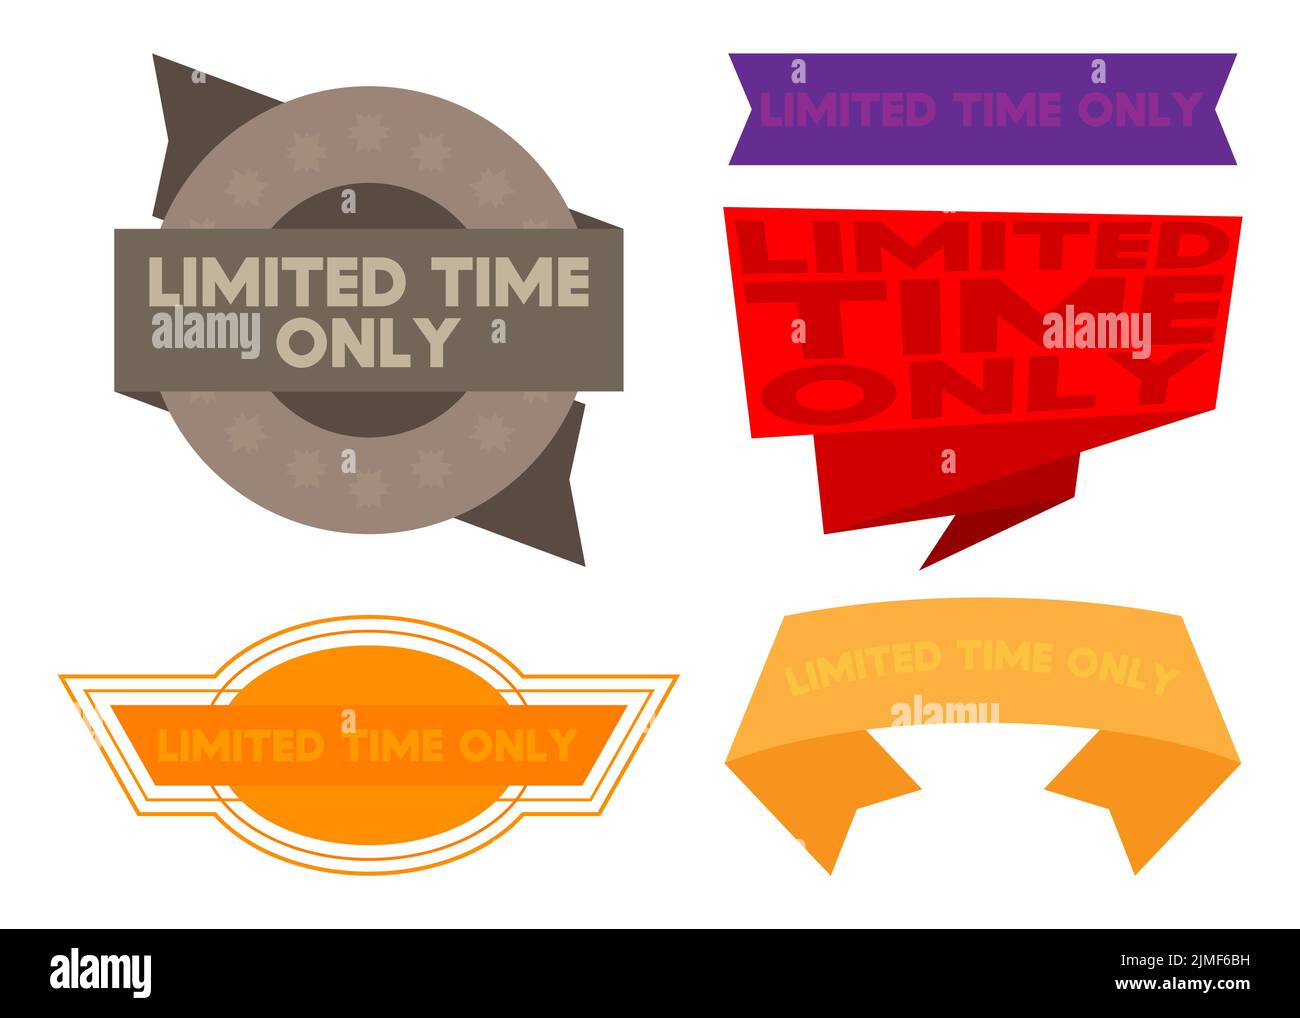 https://c8.alamy.com/comp/2JMF6BH/set-of-ribbon-with-limited-time-only-text-banner-template-label-sticker-sign-2JMF6BH.jpg